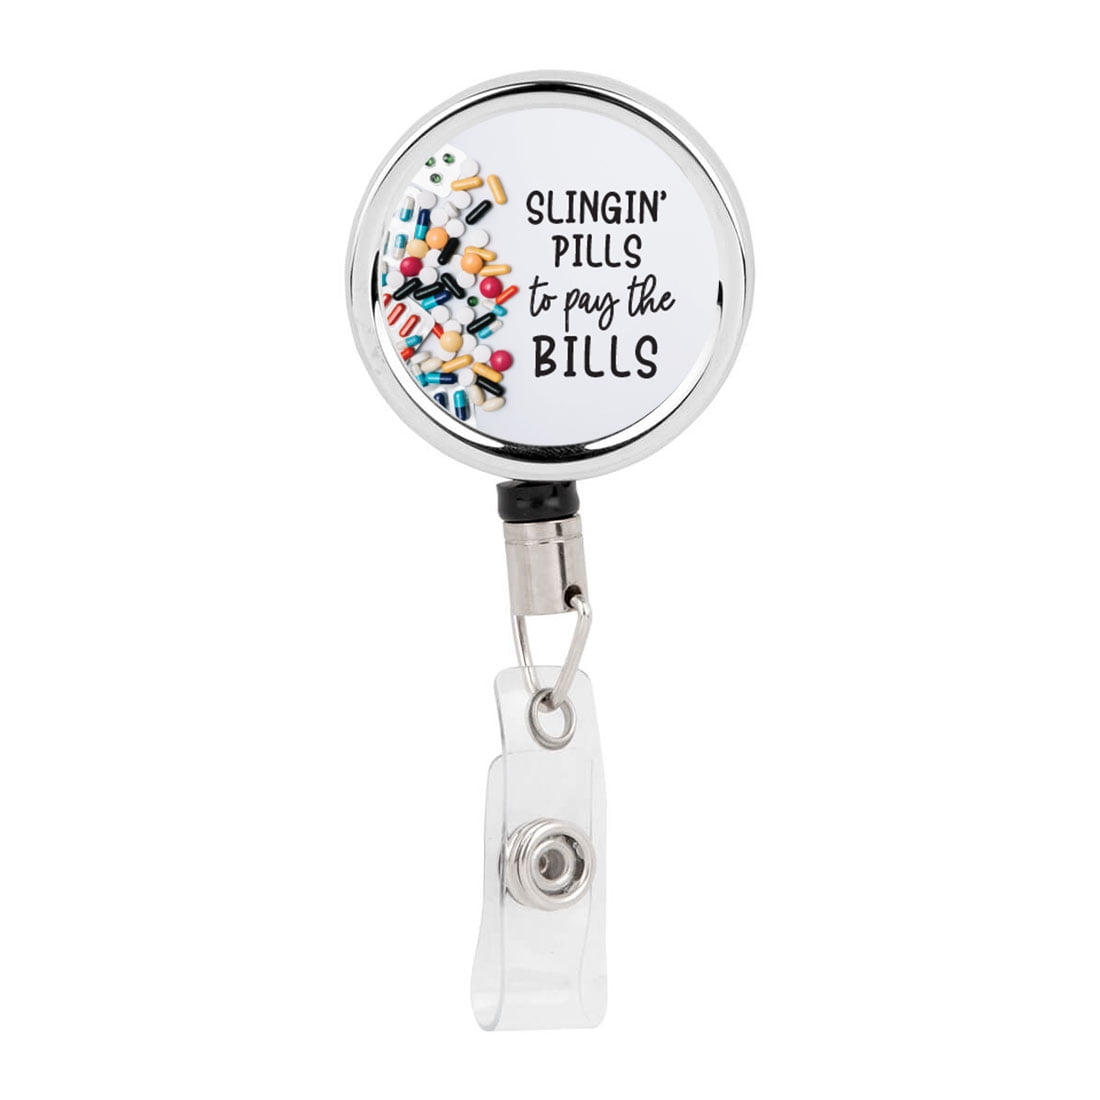 Koyal Wholesale Retractable Badge Reel Holder With Clip, Key Belt Clip  Slinging' Pills To Pay The Bills Pharmacy